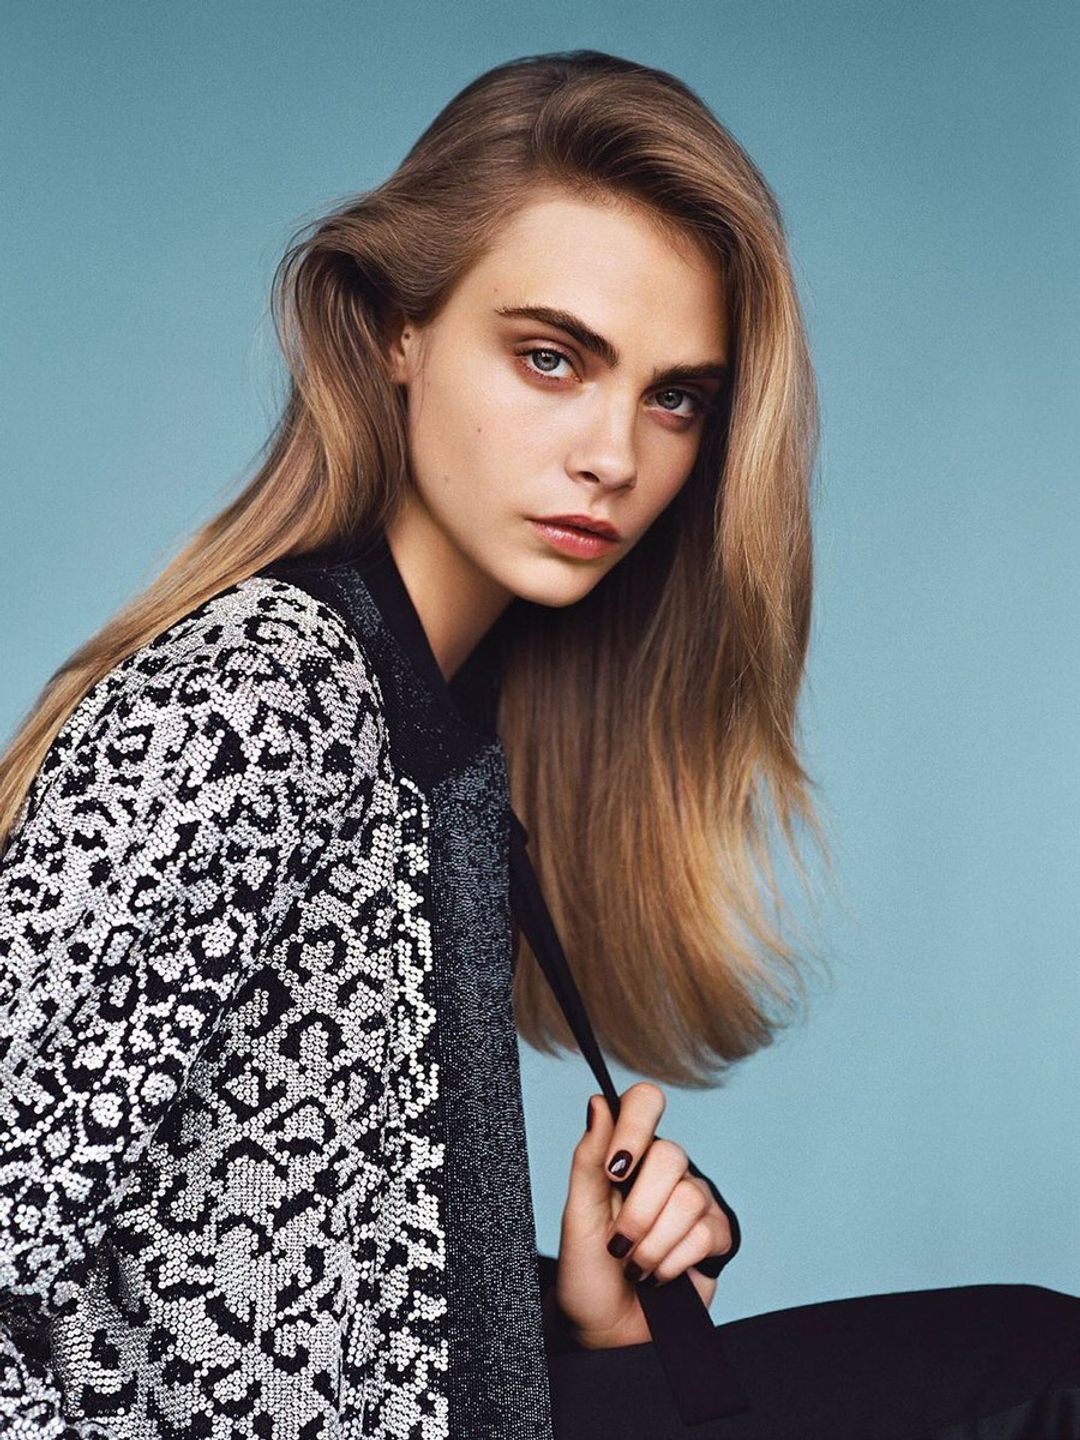 Cara Delevingne where does she live